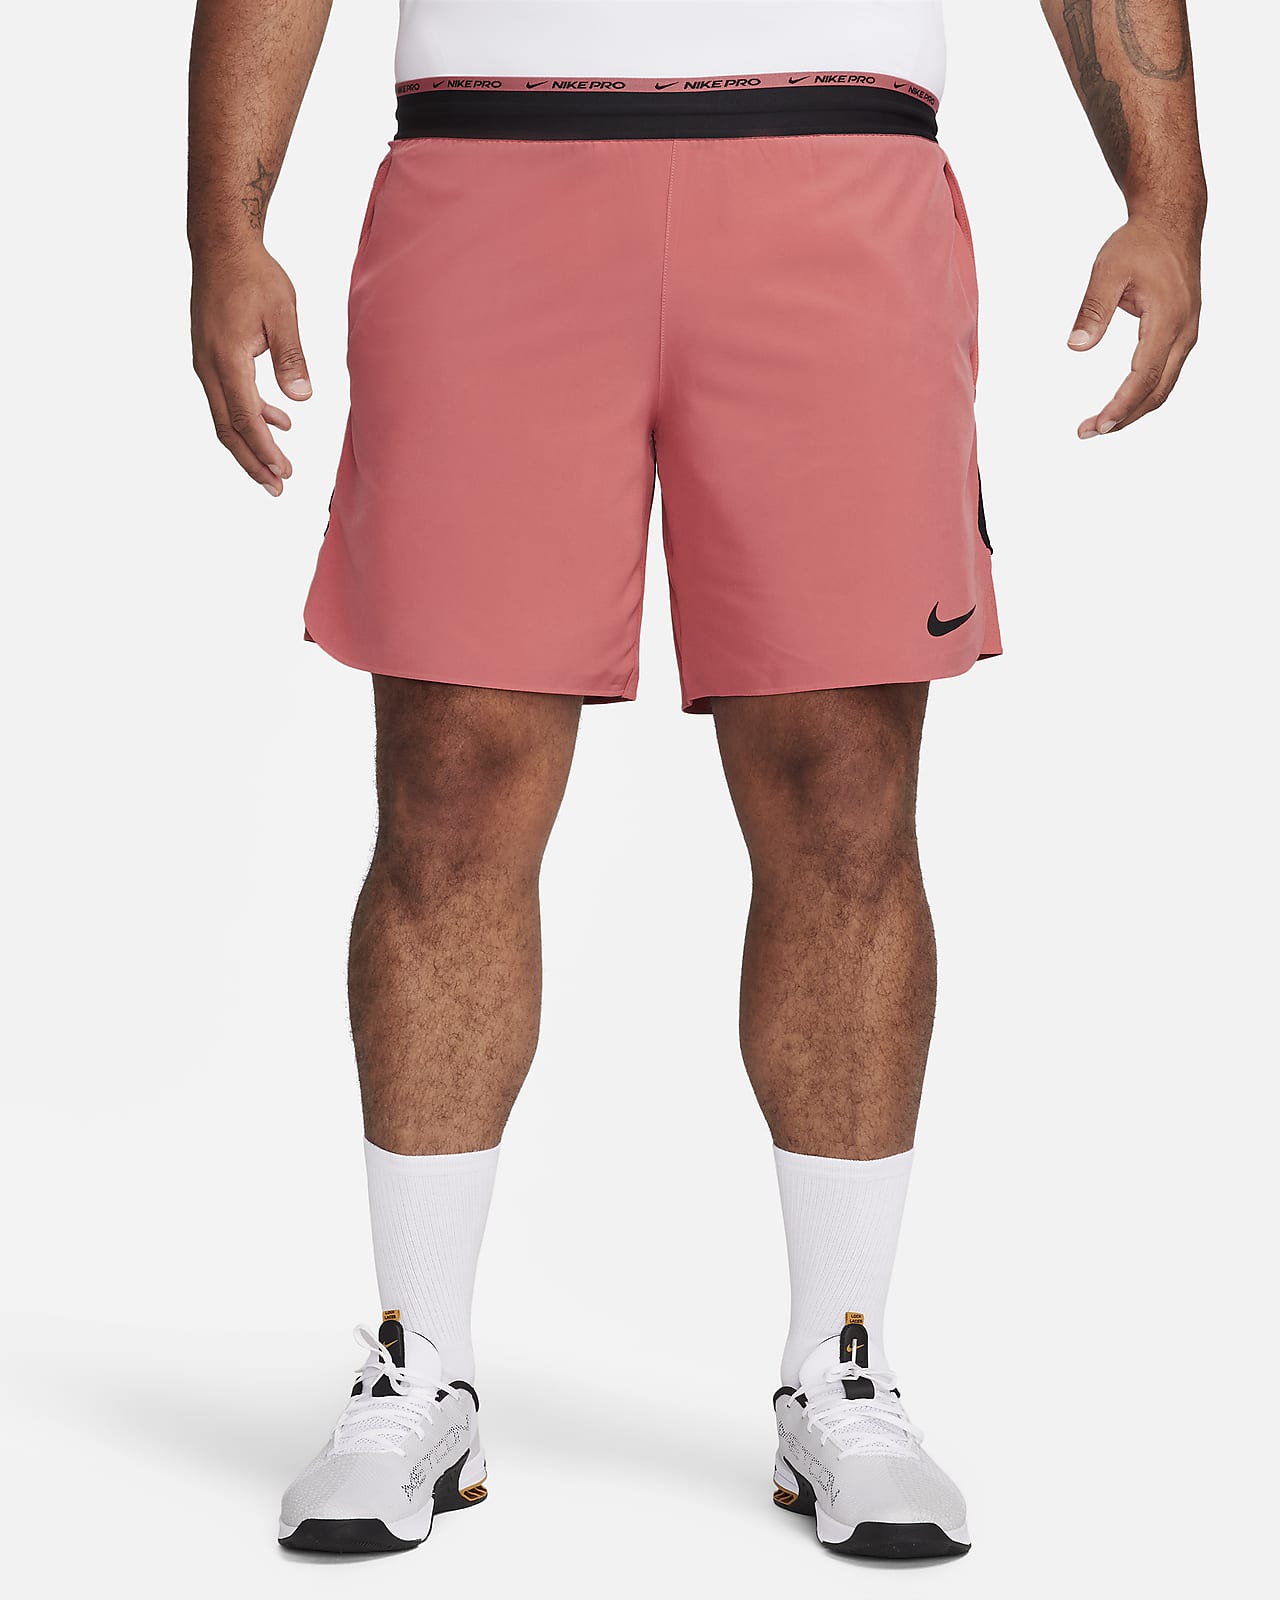 Nike Dri-FIT Flex Rep Pro Collection Men's 20cm (approx.) Unlined Training  Shorts. Nike LU